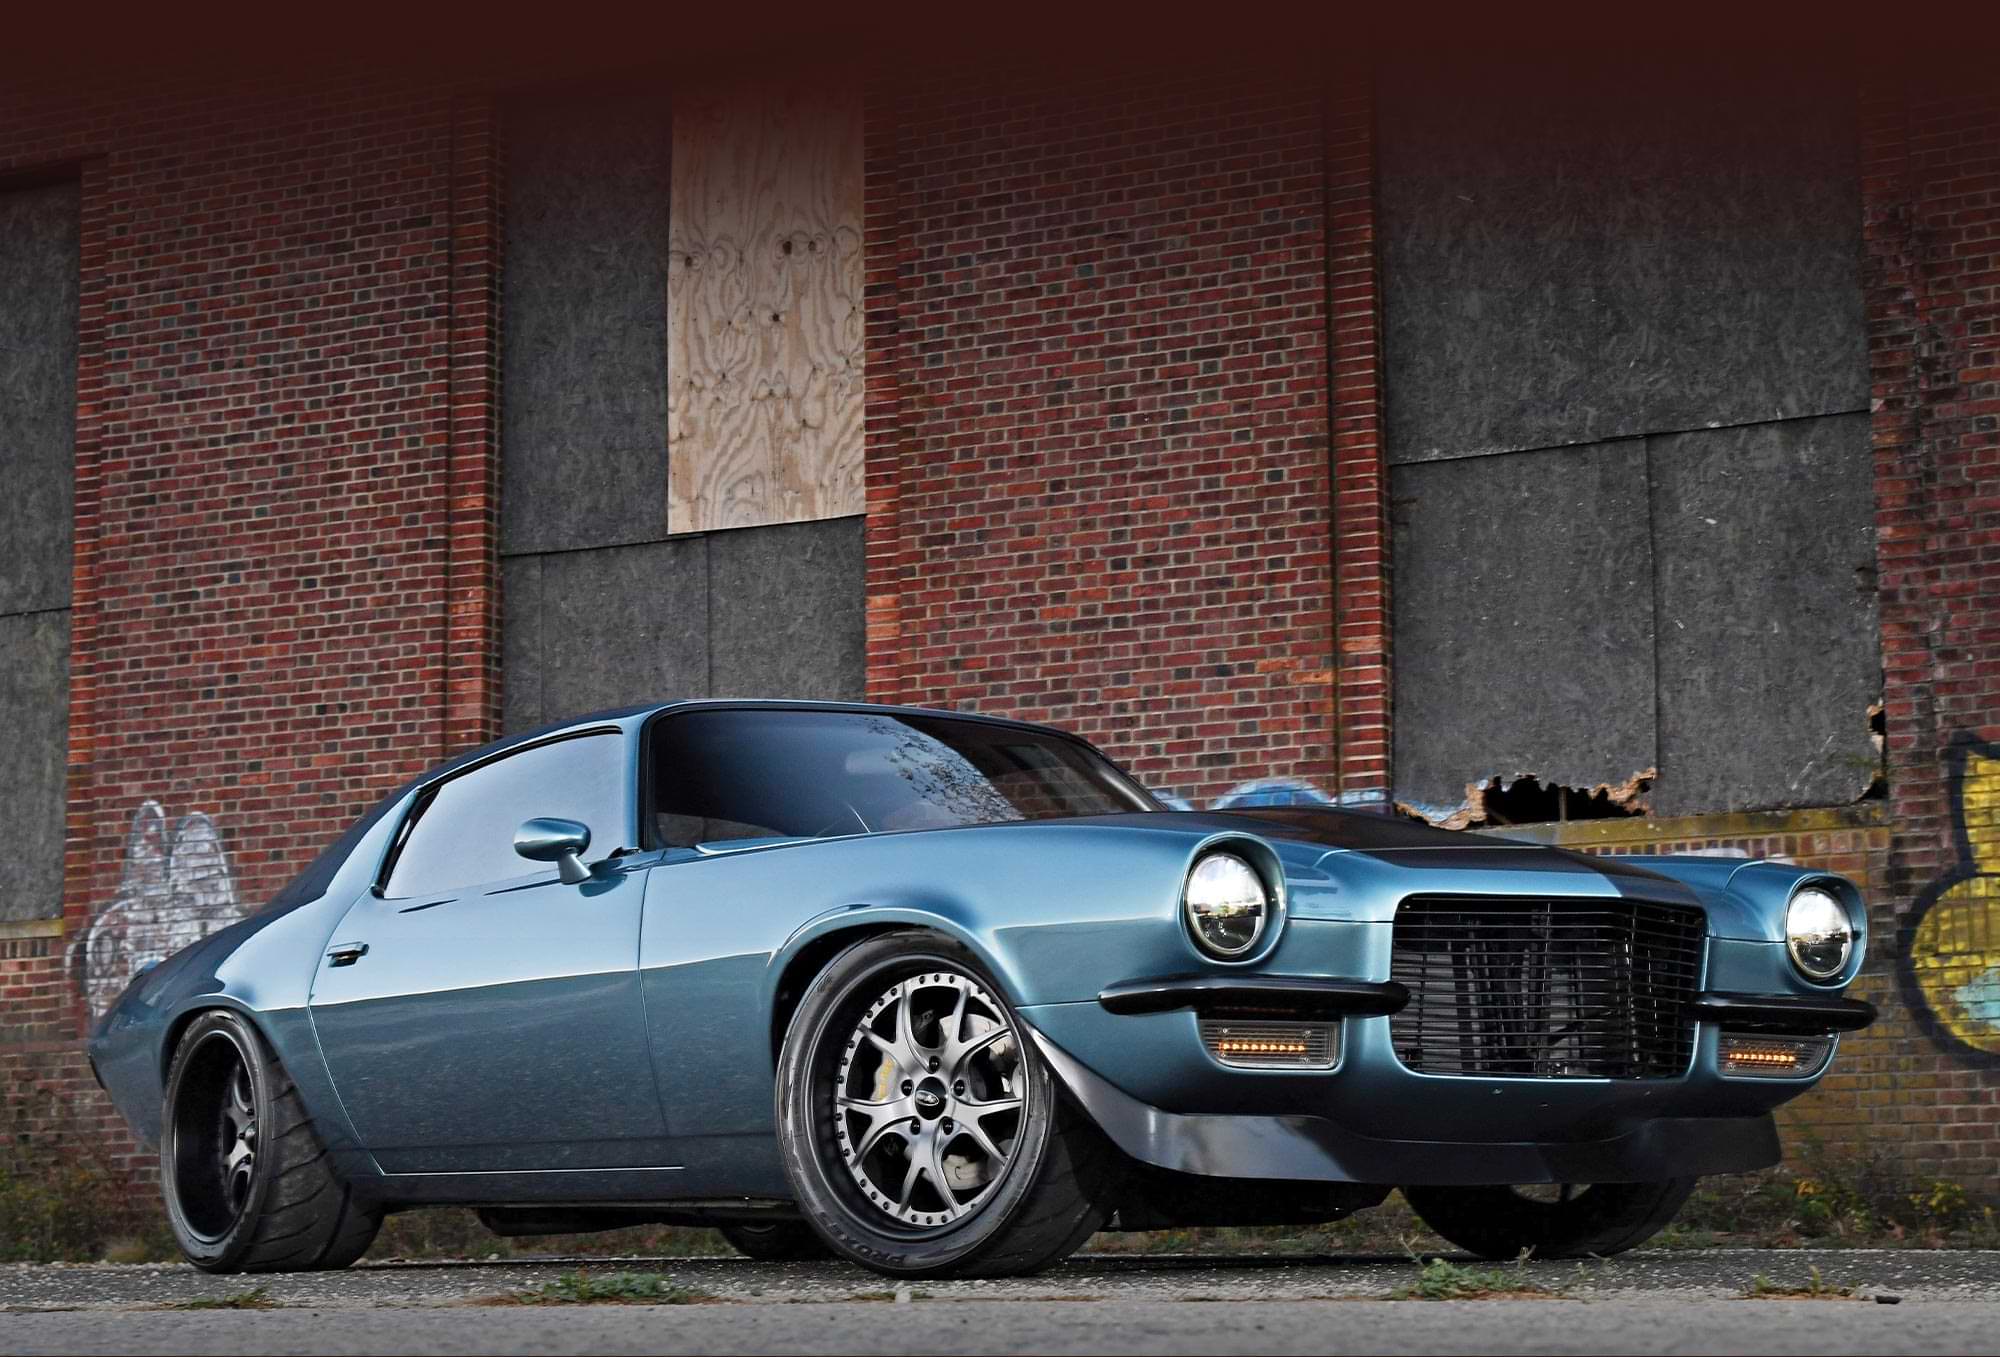 low angle three quarter view of Anthony Cacioppo's slate blue and black '71 Camaro parked beside a graffitied brick wall